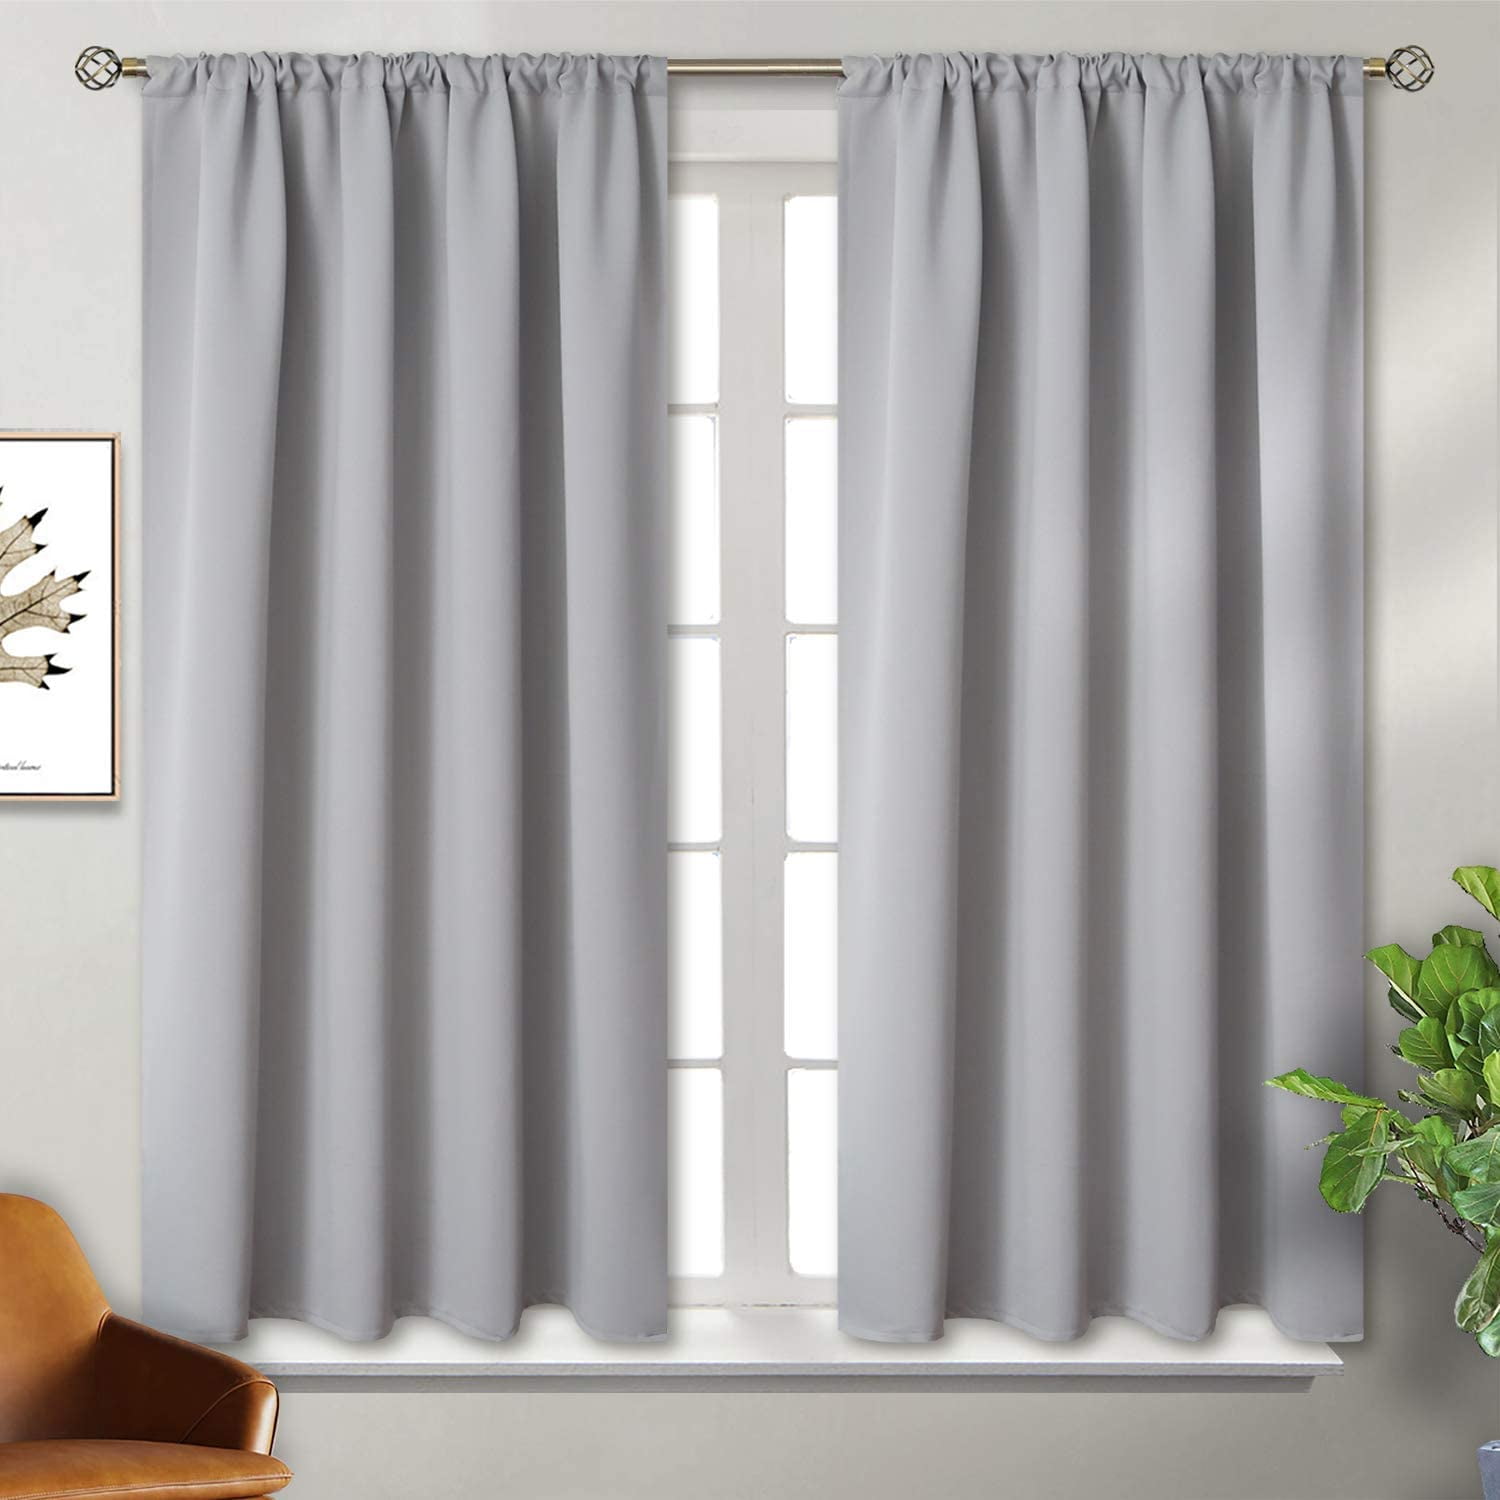 Blackout Curtain Thermal Insulated Room Darkening for Bedroom/Livingroom,2 Panel 